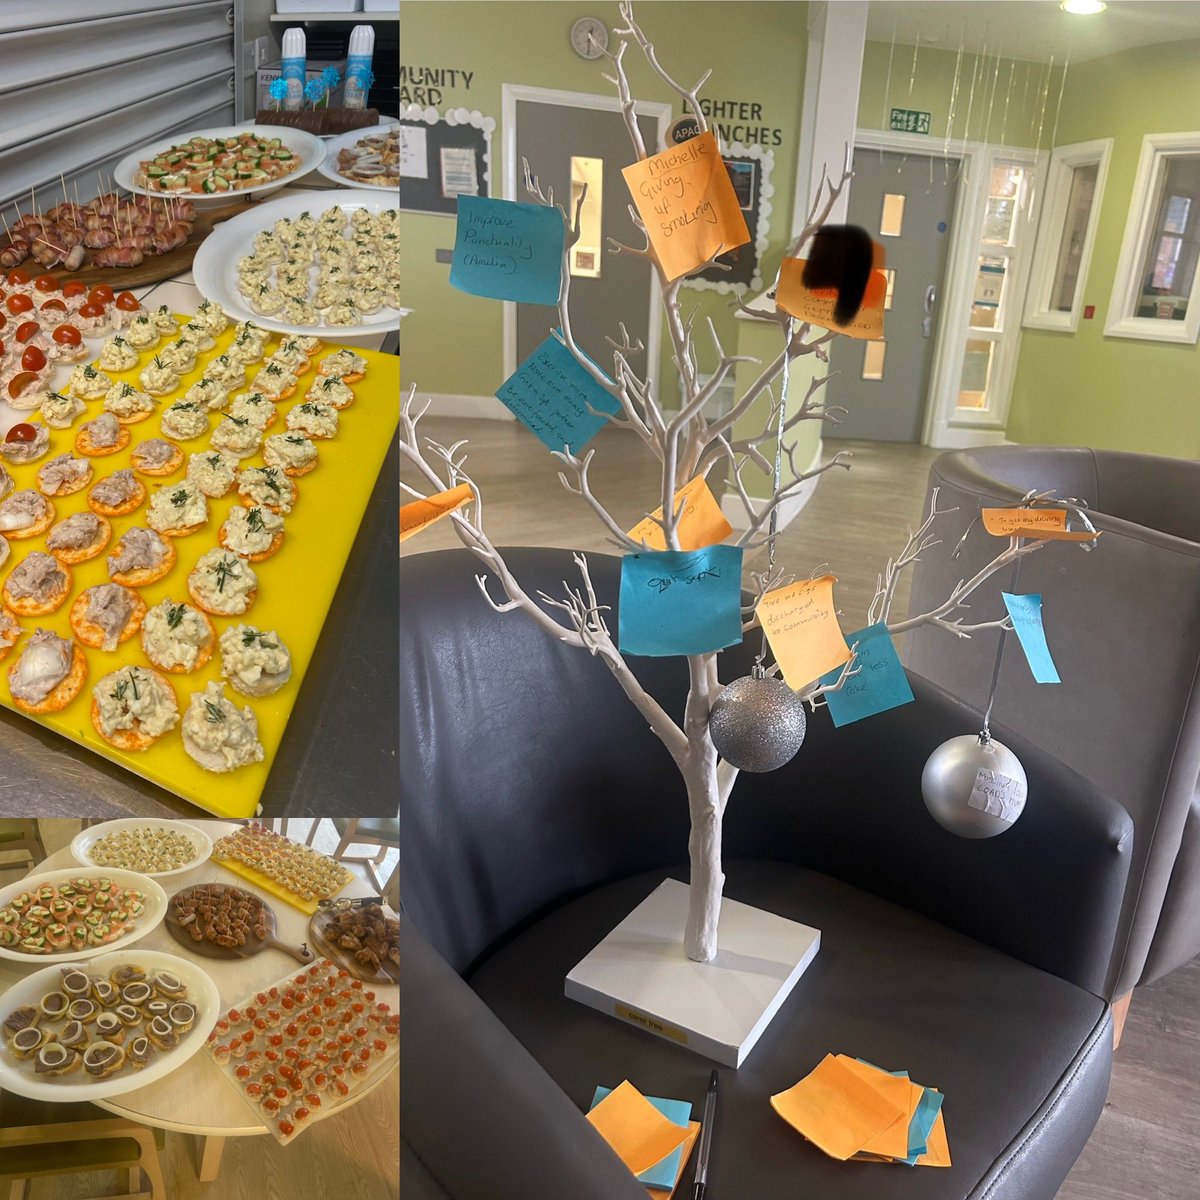 New Year’s Eve on Delaney Canapés for lunch ✔️ Community meeting ✔️ Our New Year’s resolution tree✔️ New Year’s Eve bags filled ✔️ Lots to look forward to in 2024 Keep your eyes peeled👀 🎉@JosephOgbeide4 🎉@BenStrongGMMH 🎉@AmeliaGMMH 🎉@LisaS823024566 🎉@JanNewlands